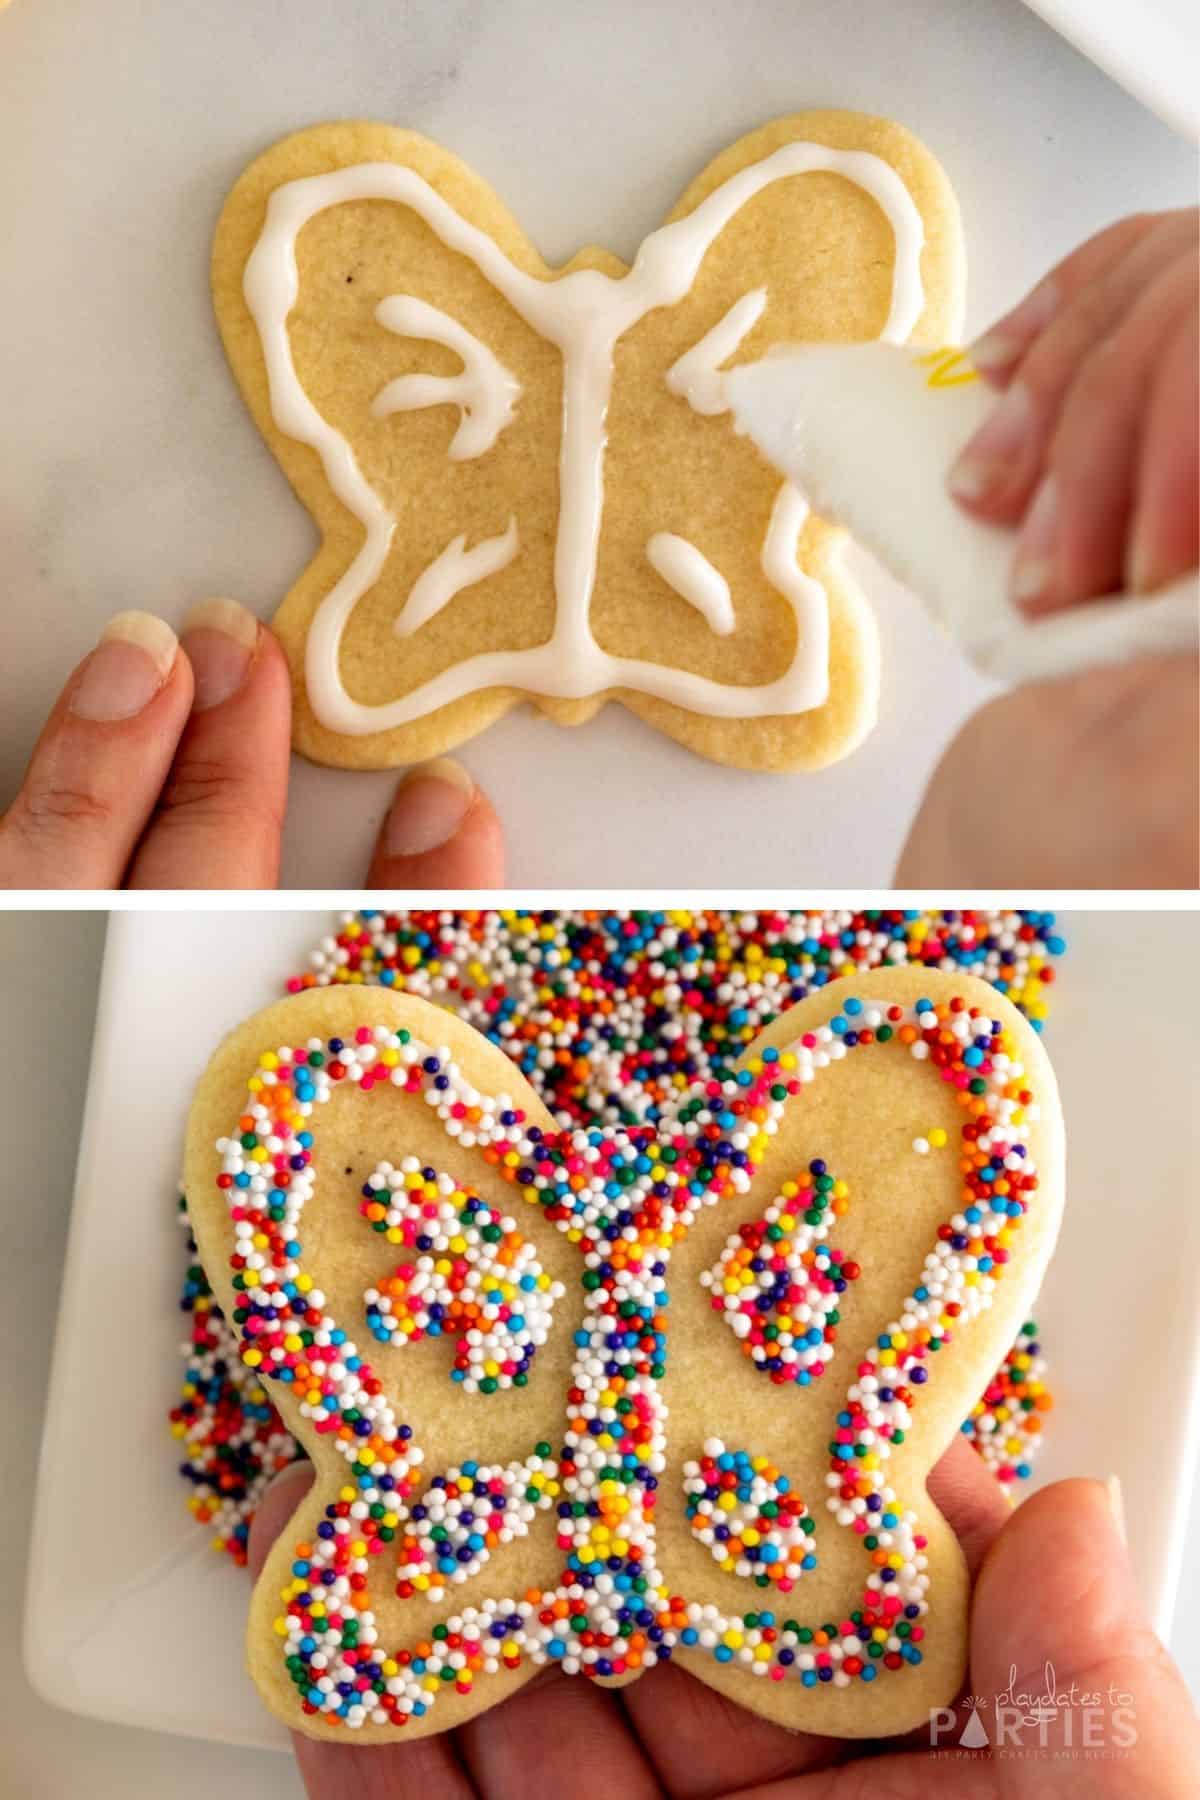 Collage of two photos showing how to decorate sugar cookies with icing and sprinkles.